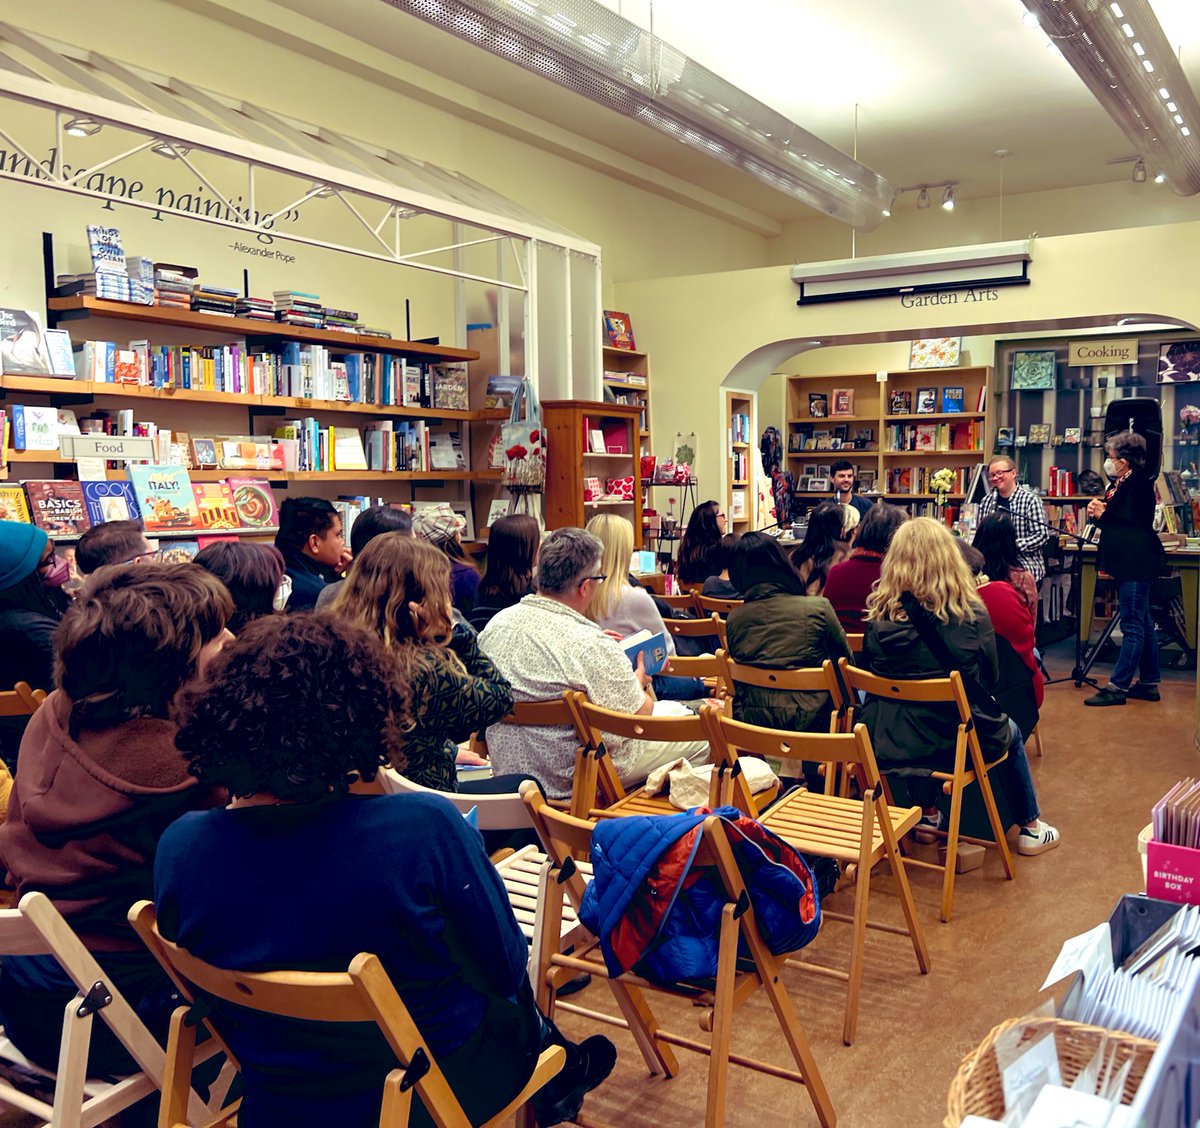 Debuting during the pandemic drastically affected my vision of what it looked like to be an author. No meeting with readers. No in-person events in California. 3 books later, my dream finally became a reality, thanks to @MrsDsBooks @thejordache @michaelleali & so many others 🩵